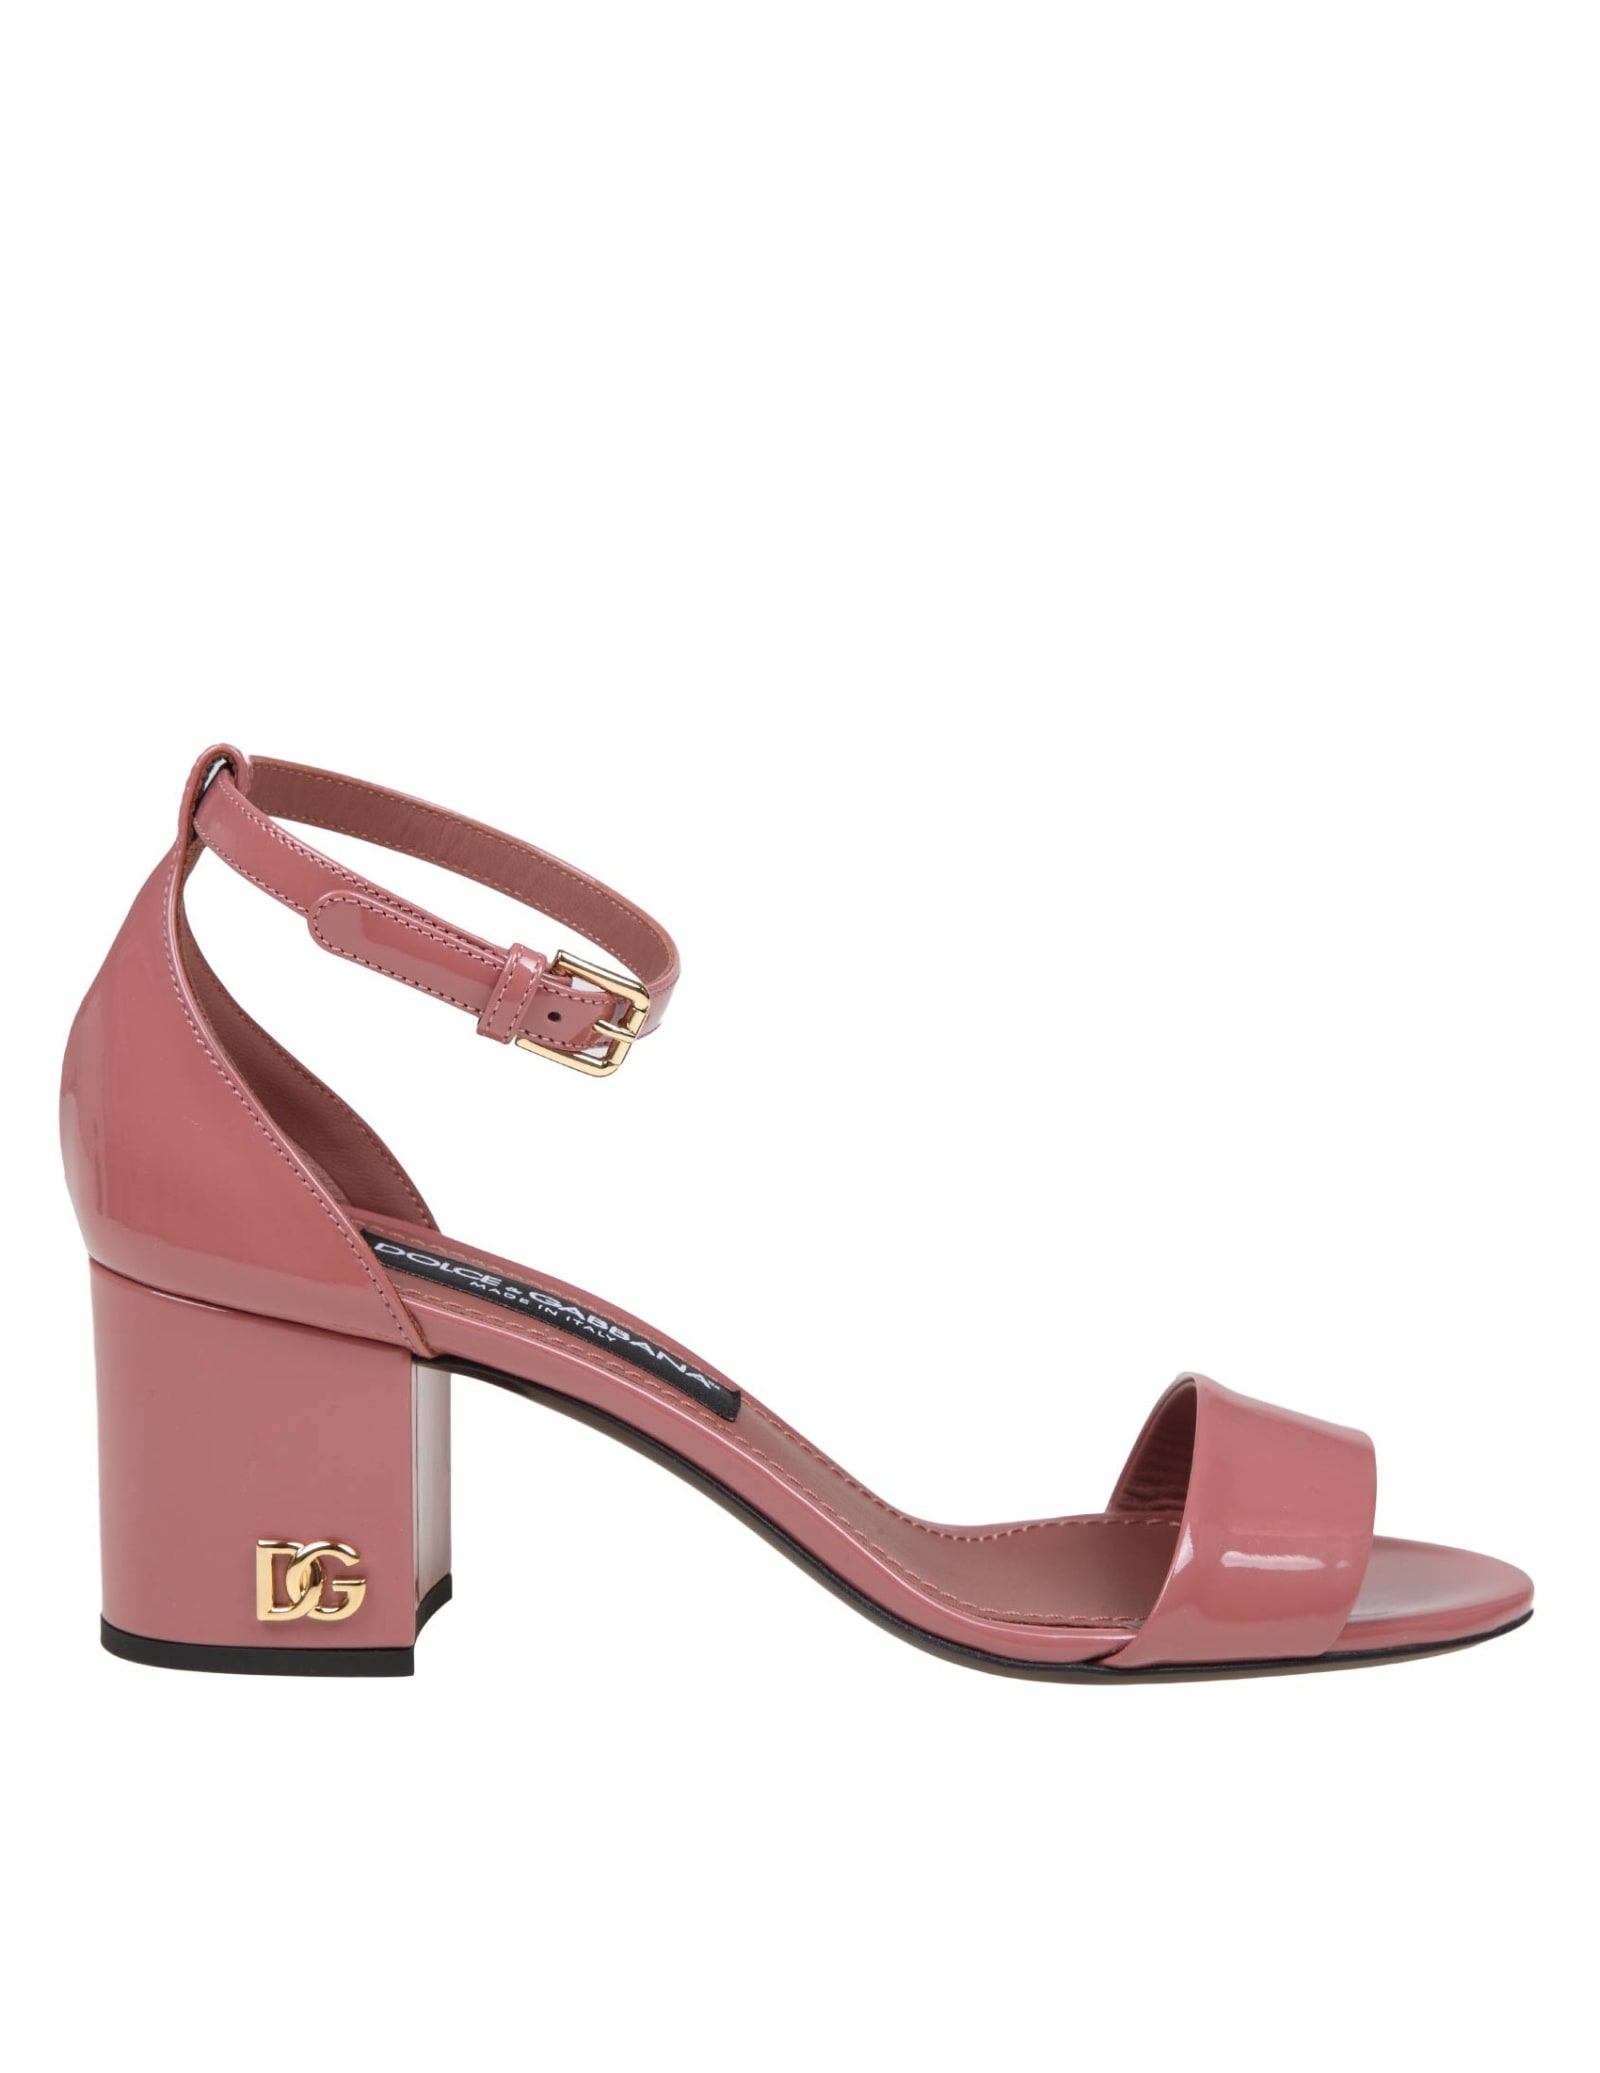 DOLCE & GABBANA PINK PAINT LEATHER SANDALS